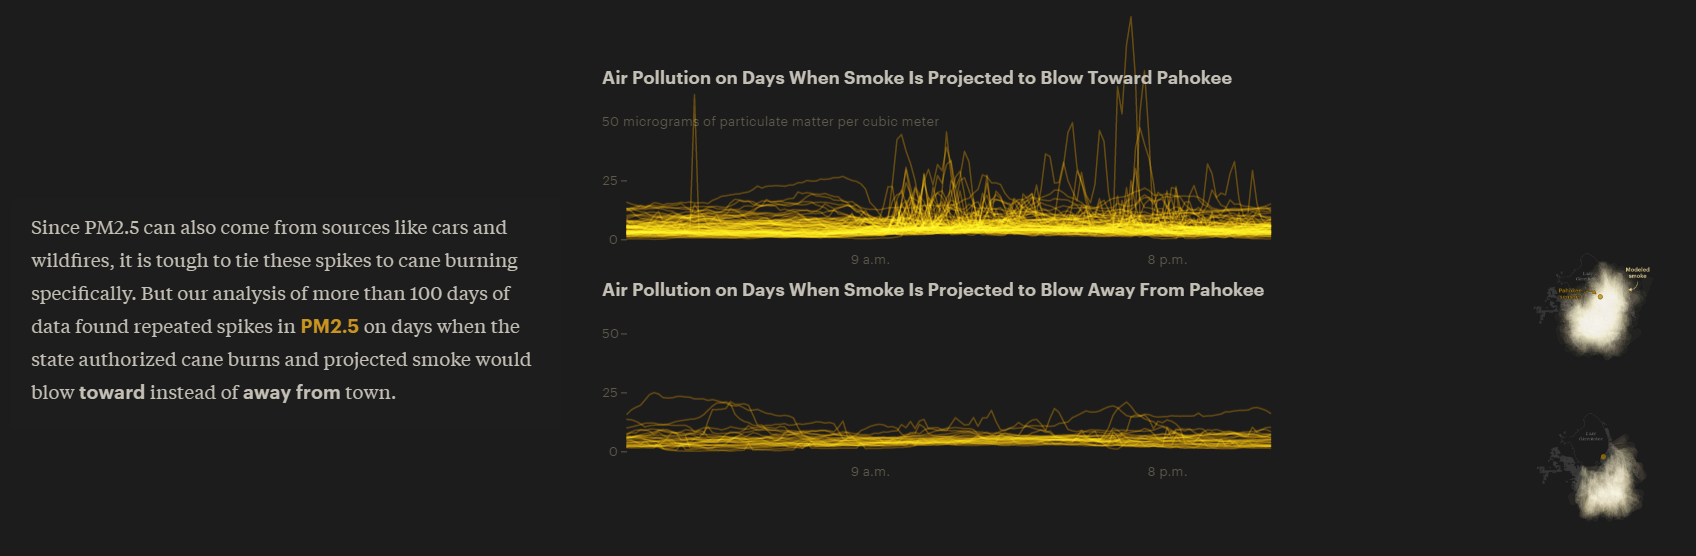 This graphic includes two line charts, showing the difference between PM2.5 levels when smoke is projected to blow towards Pahokee versus when it's projected to blow away. In the former scenario, there are high PM2.5 levels and many spikes; the latter is calmer.